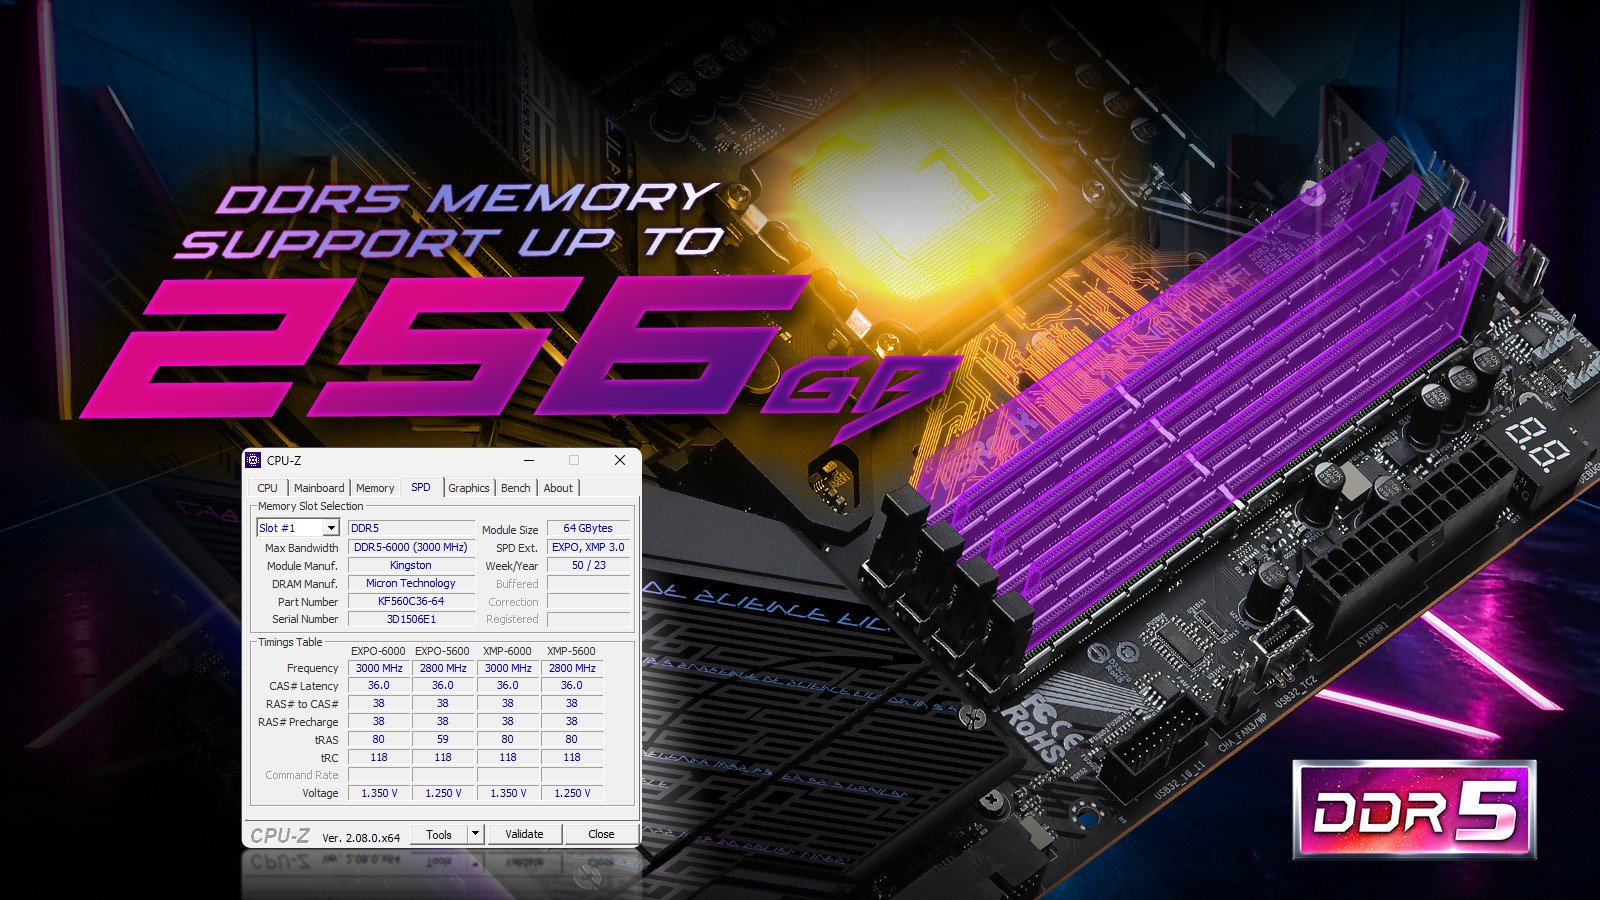 ASRock Motherboard Now Supports Memory Capacity up to 256GB!